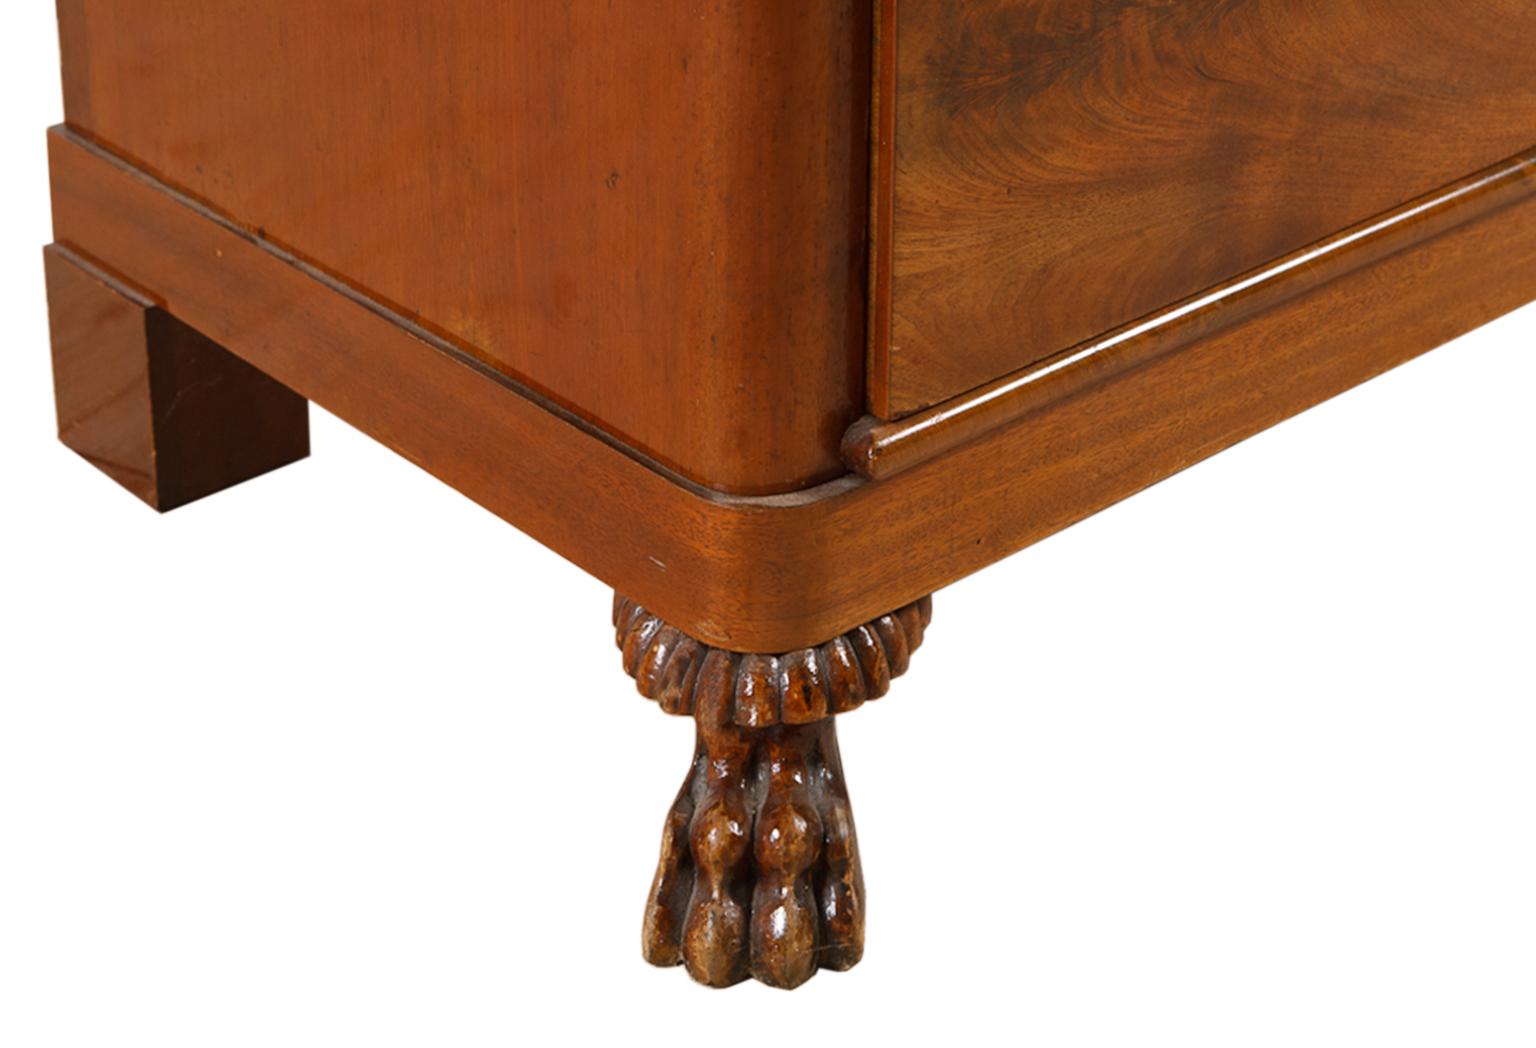 Empire Chest of Drawers in West Indies Mahogany, Denmark, circa 1820 (Messing)